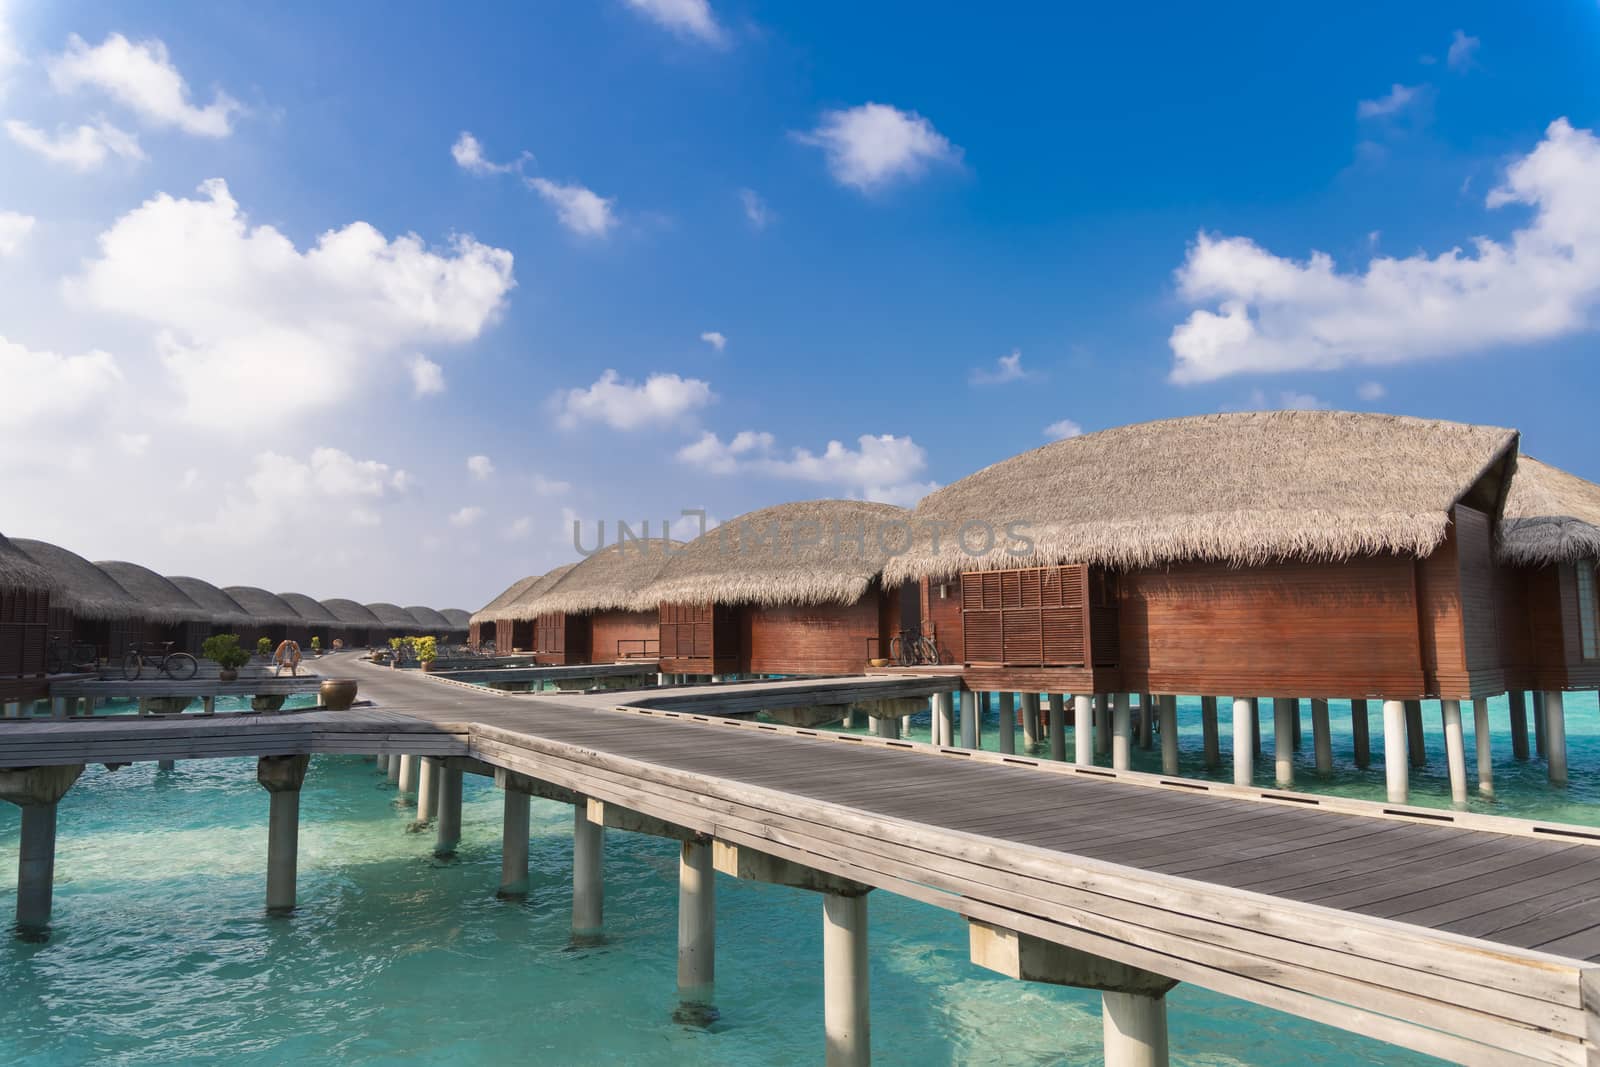 Luxury hotel with a line of bungalows over the water and a wooden path between them.